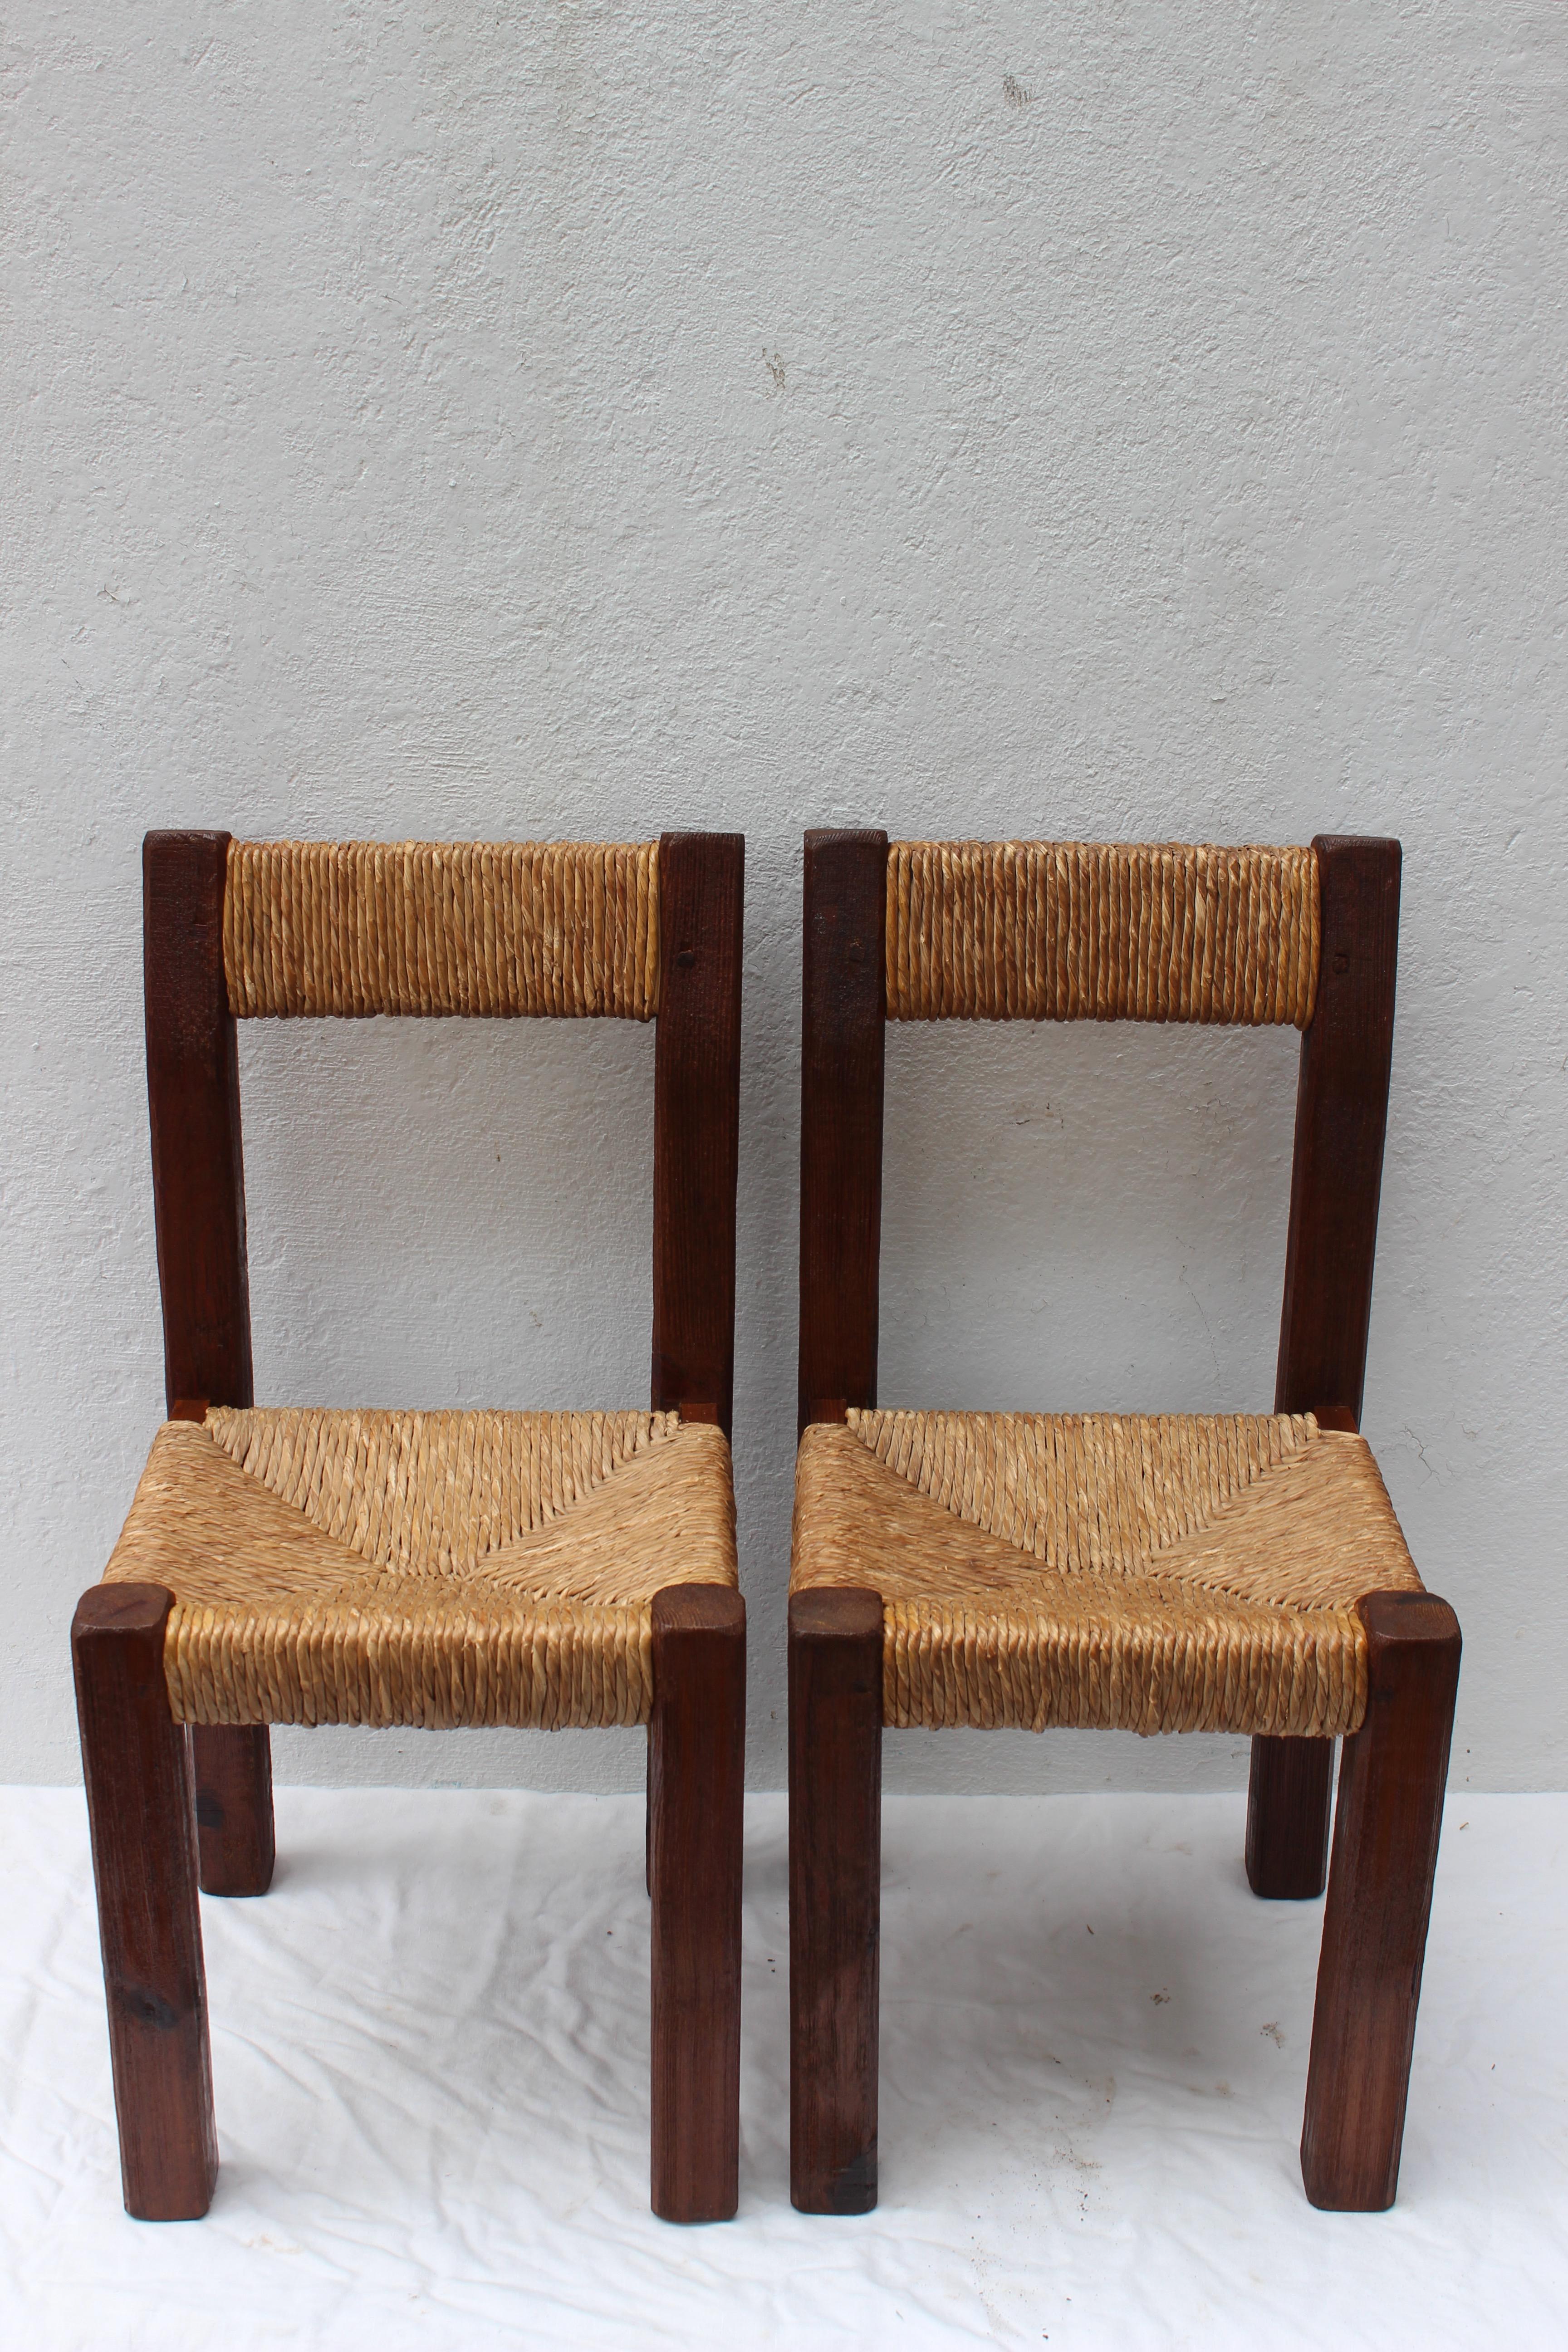 Pair of French rustic wood side chairs with rush seats in the style of Charlotte Perriand.